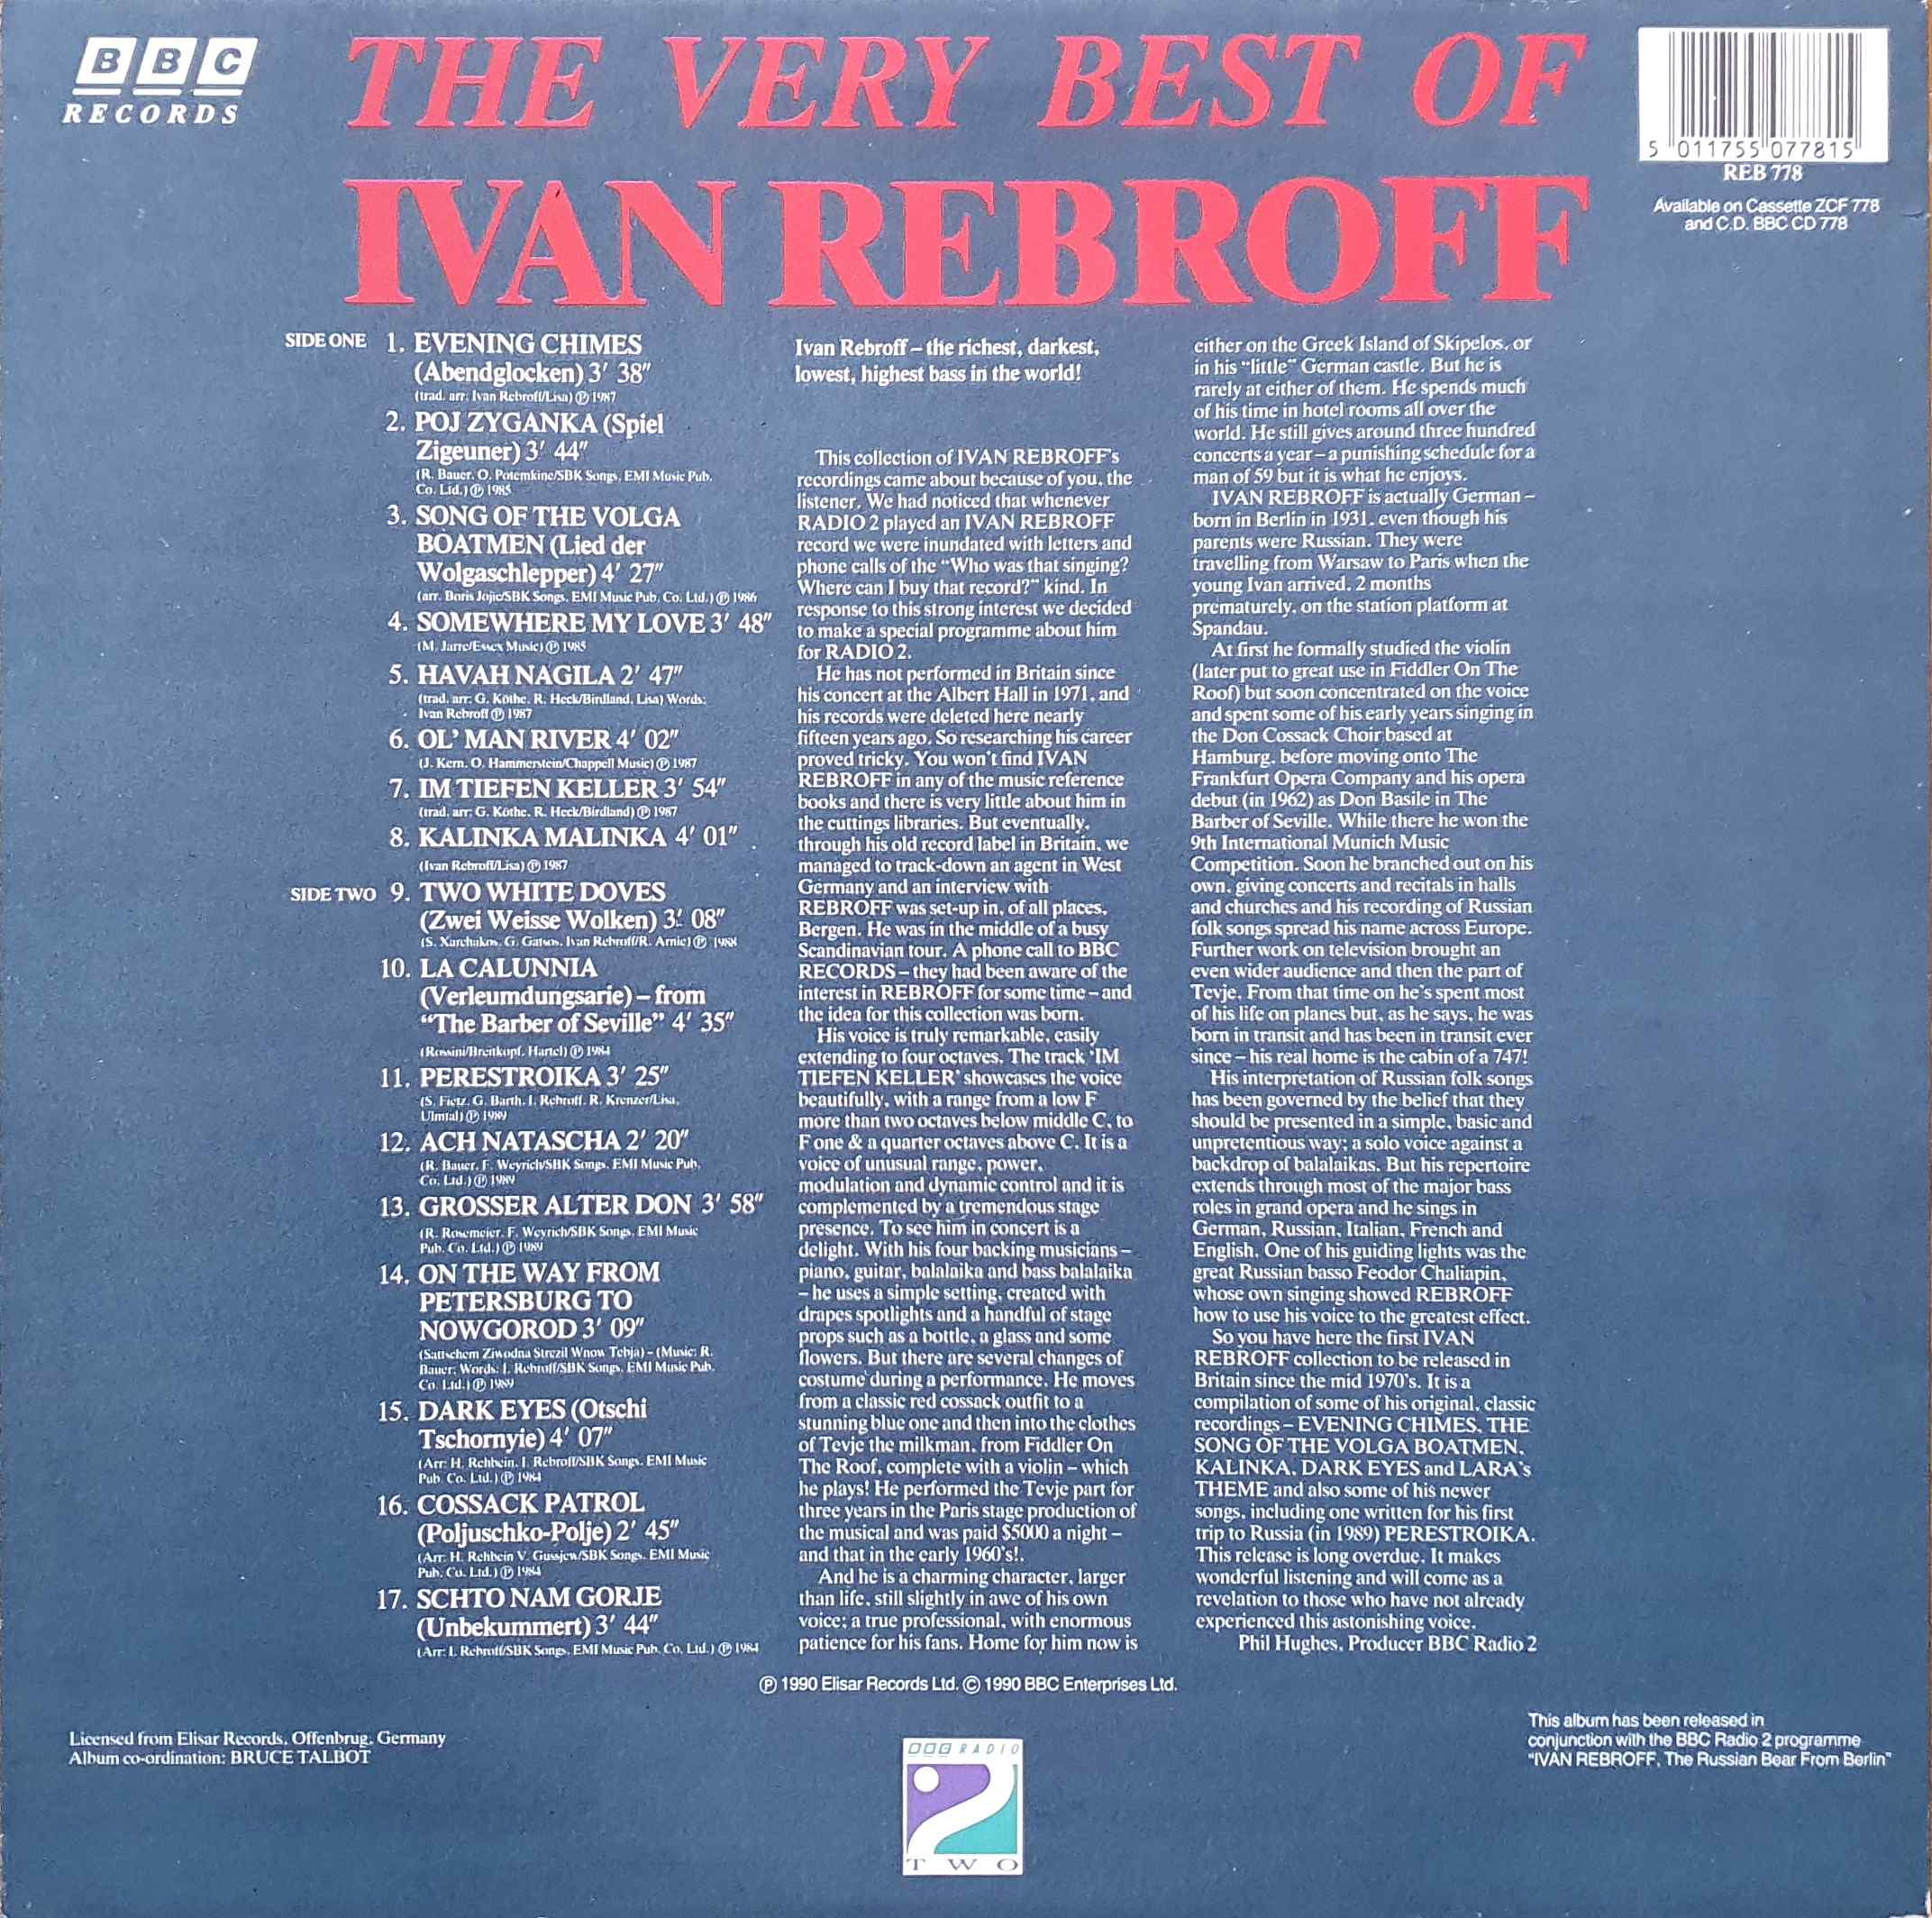 Picture of REB 778 The very best of Ivan Rebroff by artist Ivan Rebroff from the BBC records and Tapes library